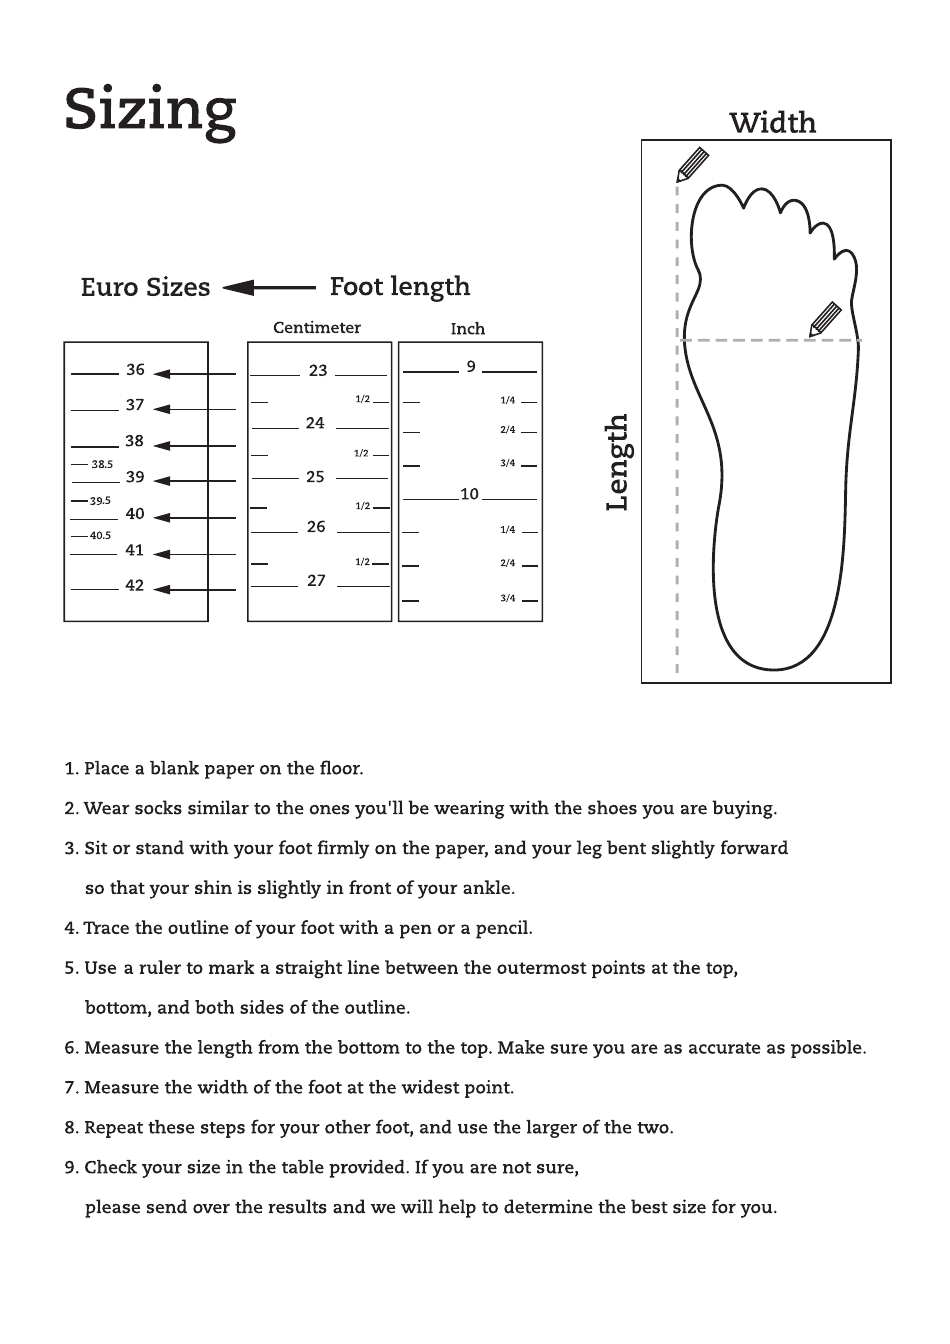 Foot Measurement Chart (Euro Sizes), Page 1